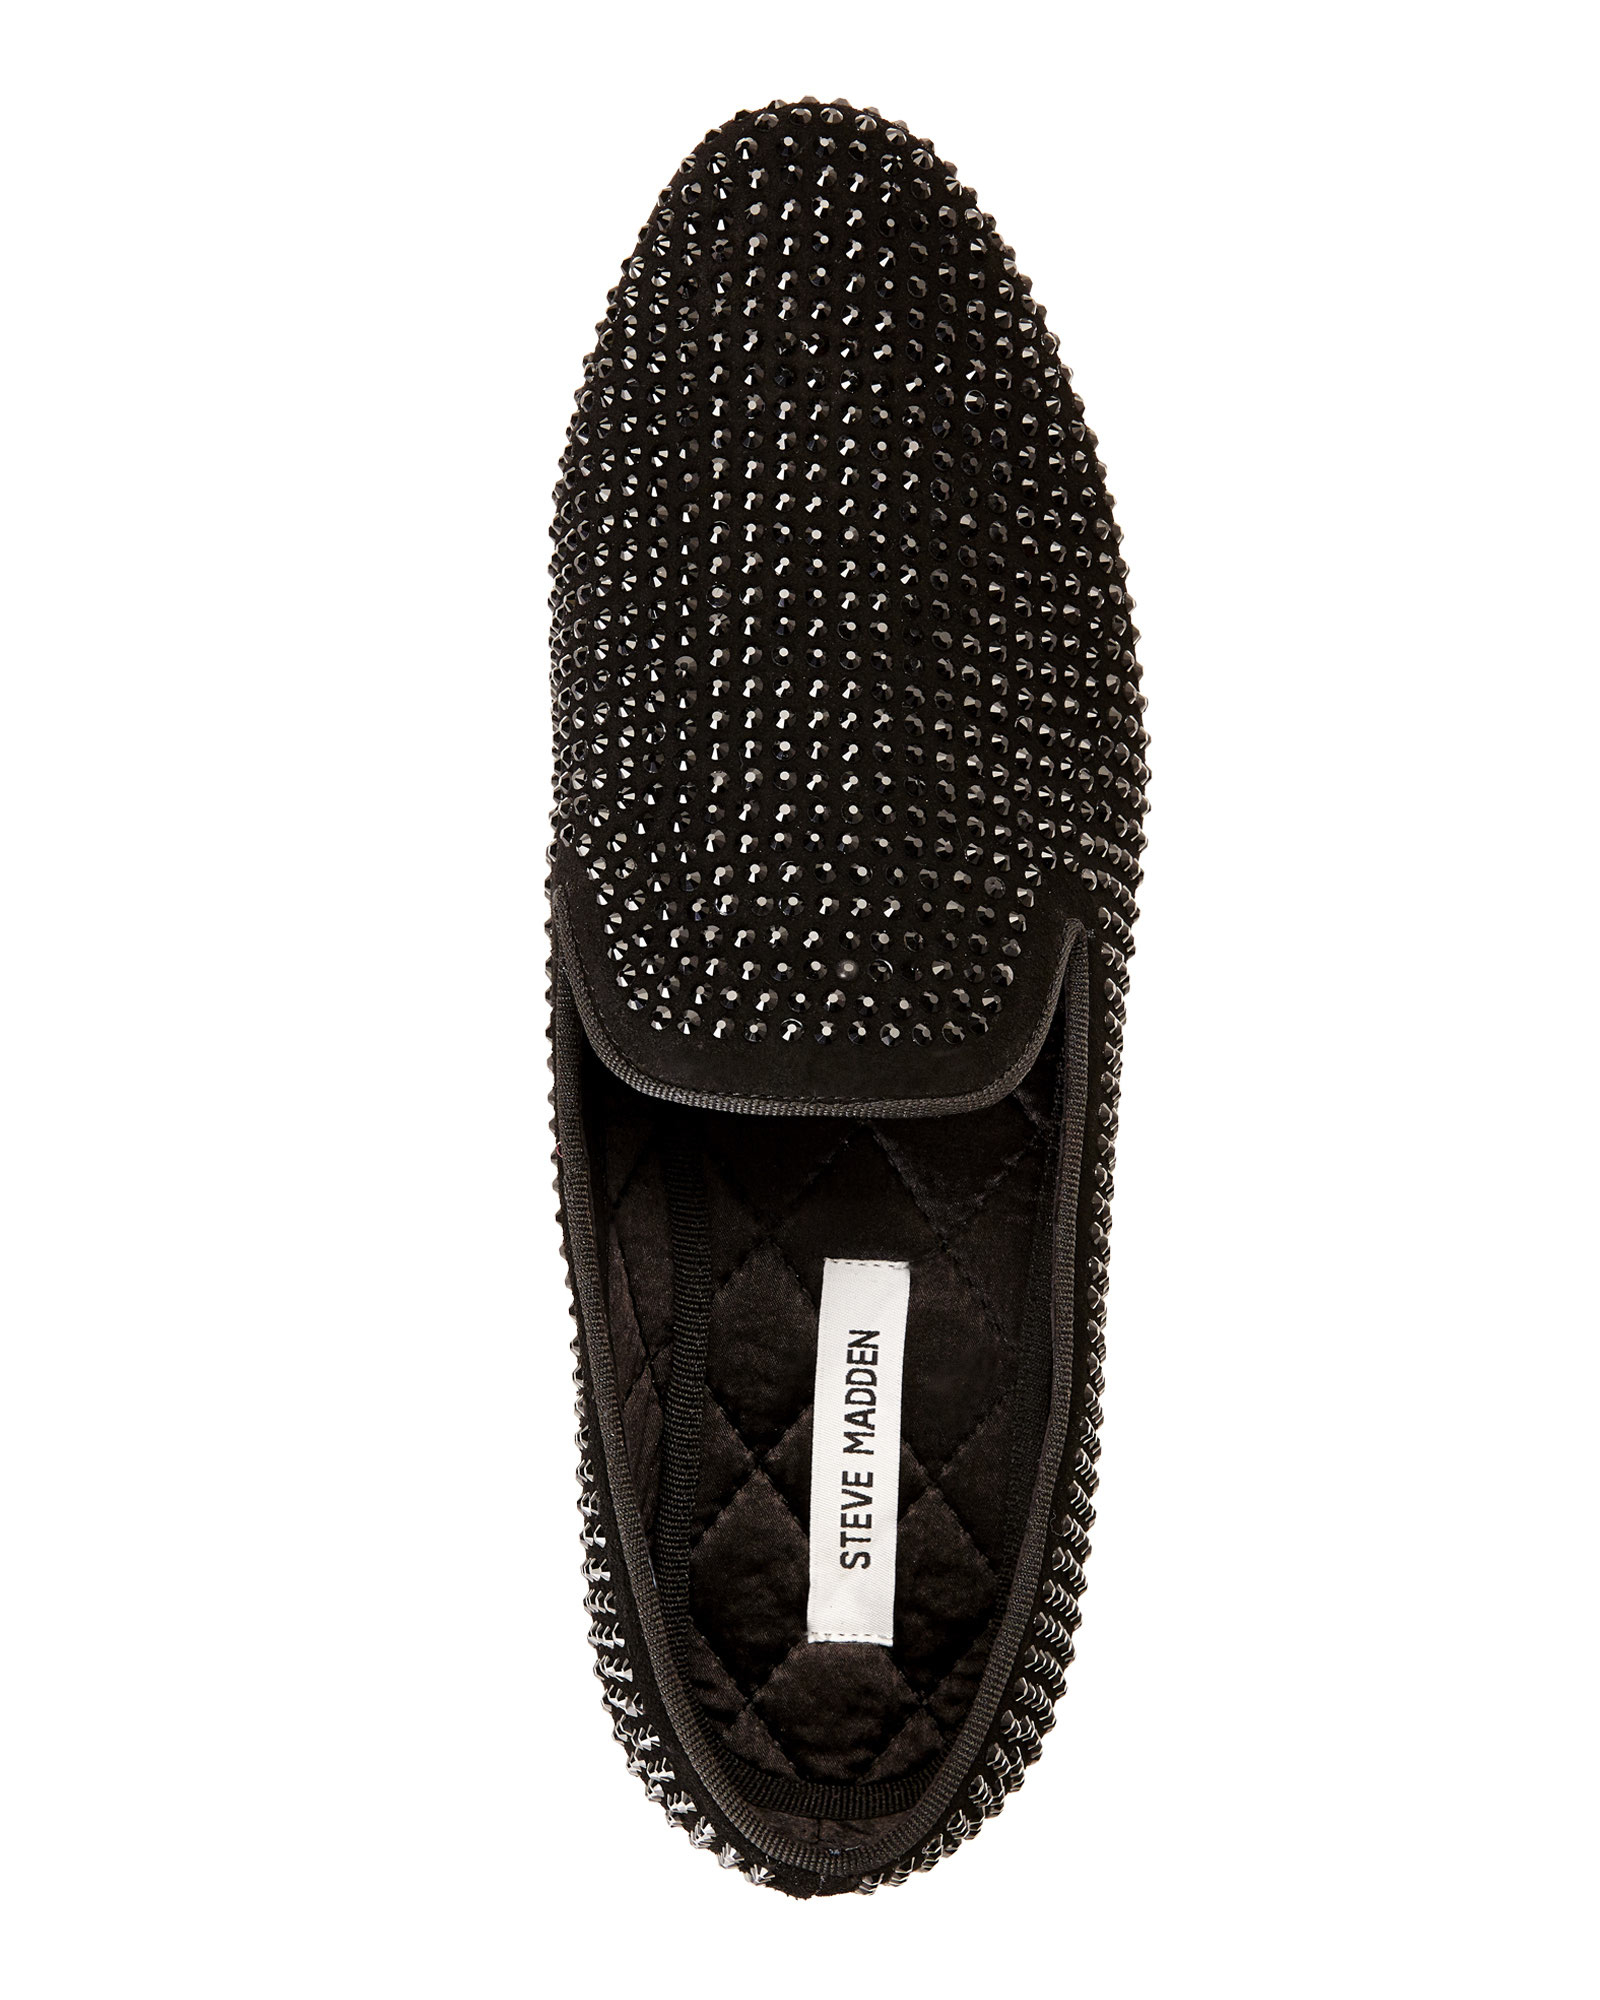 Steve Madden Black Caviarr Smoking Loafers for Men - Lyst